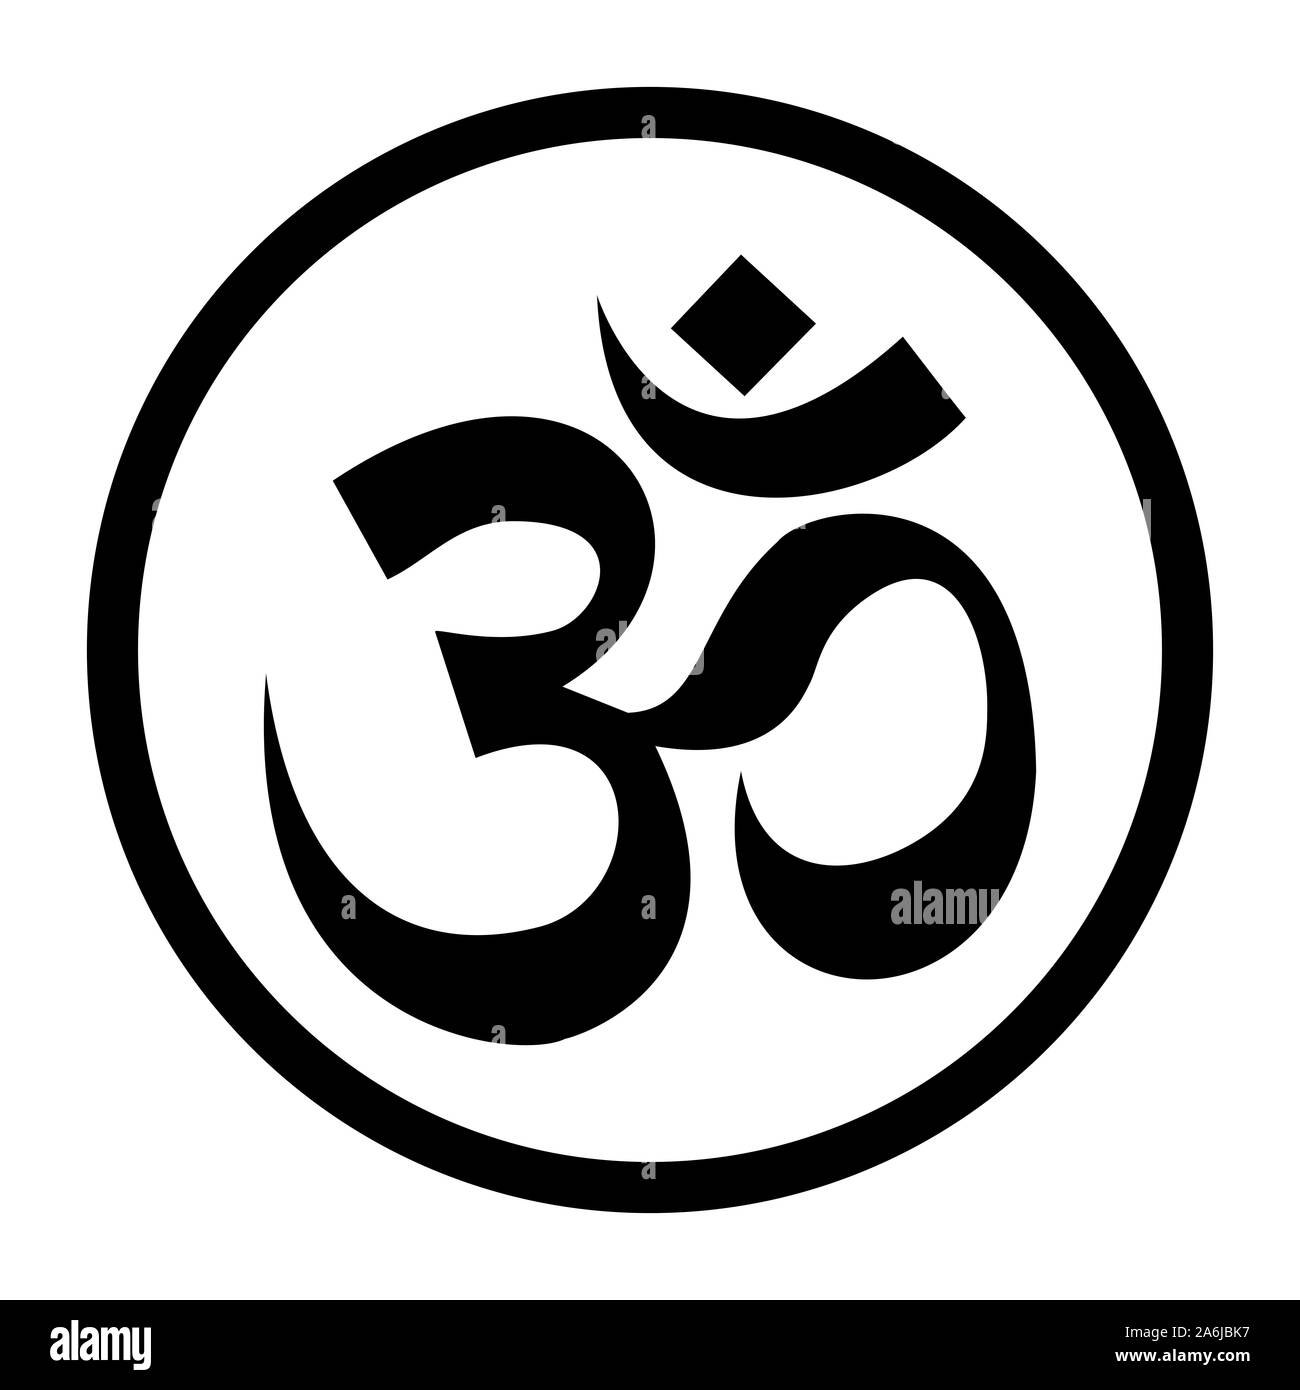 Om symbol icon in a circle Stock Photo